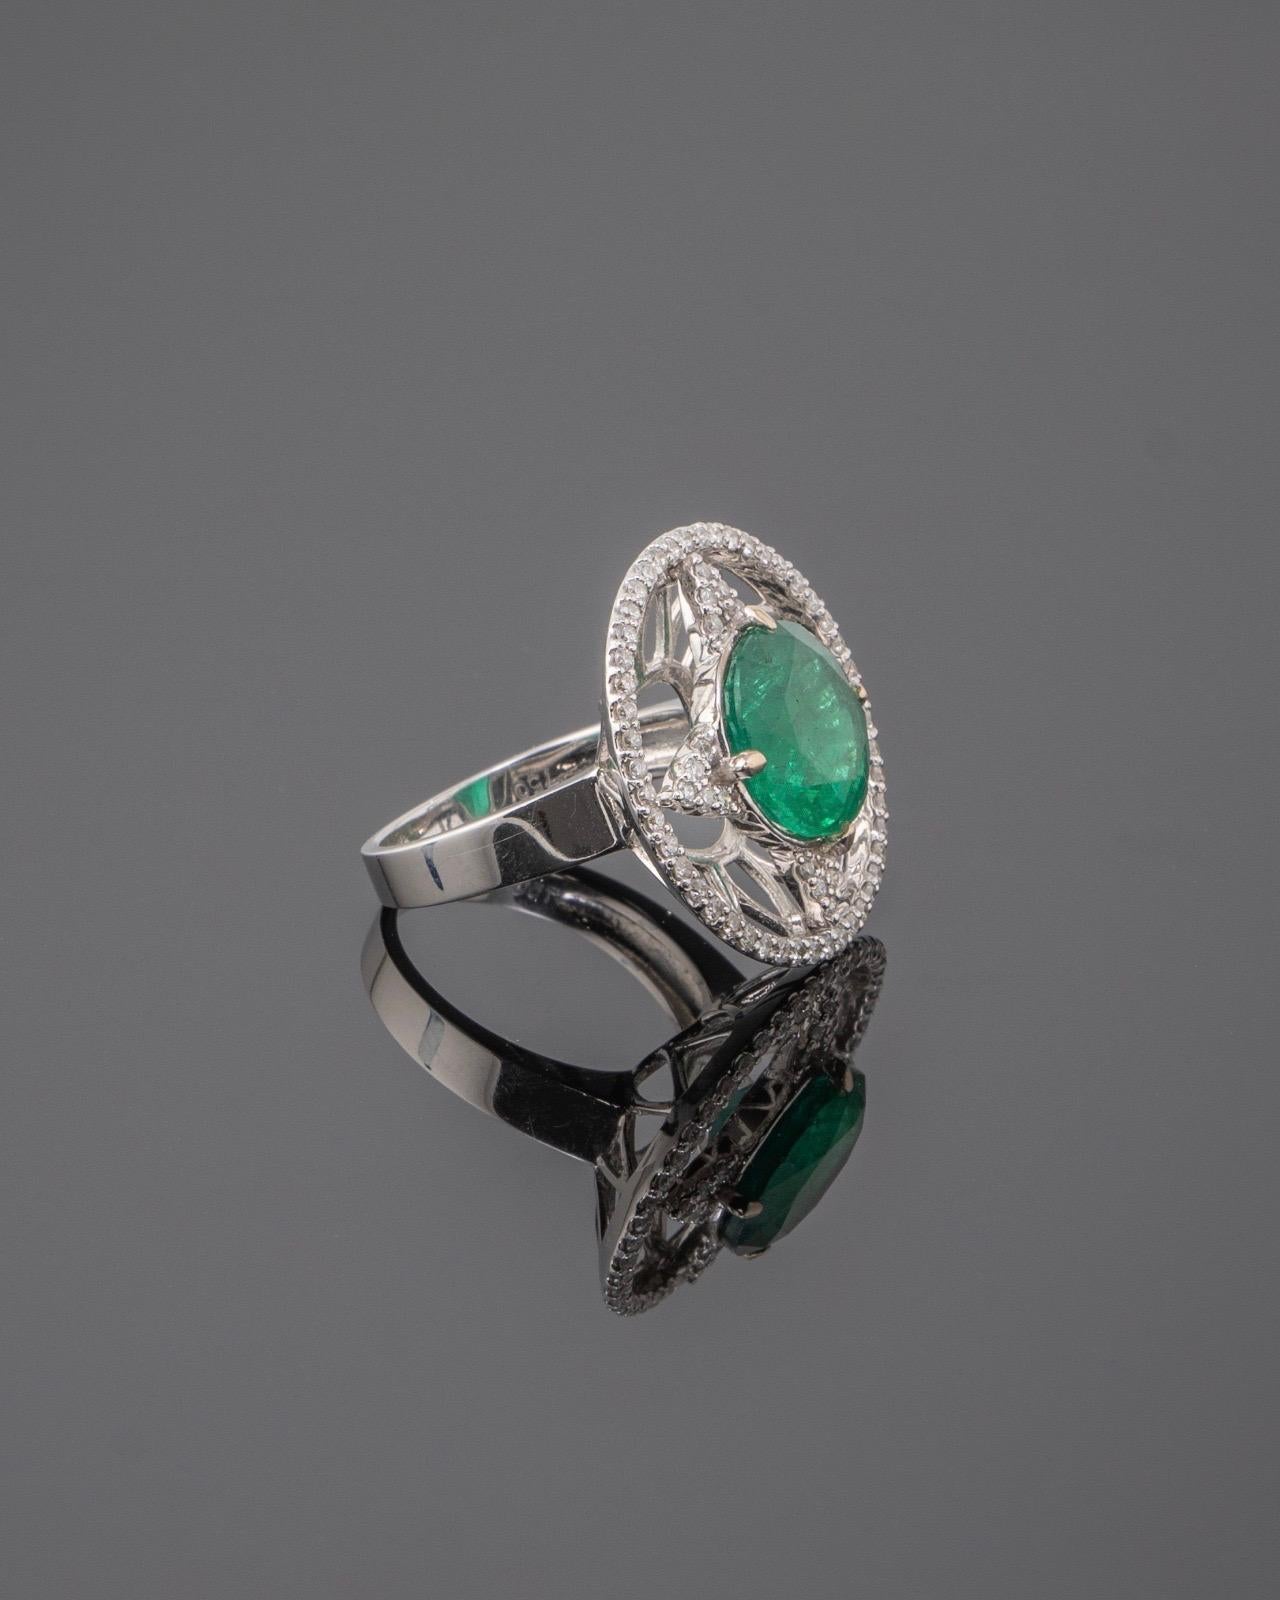 Make a statement with this beautiful, one of a kind cocktail ring, with a 5.34 carat Zambian Emerald centre stone and 1.98 carat White Daimonds, all set in solid 18K white gold. The emerald is of great lustre and has an ideal colour. Currently a